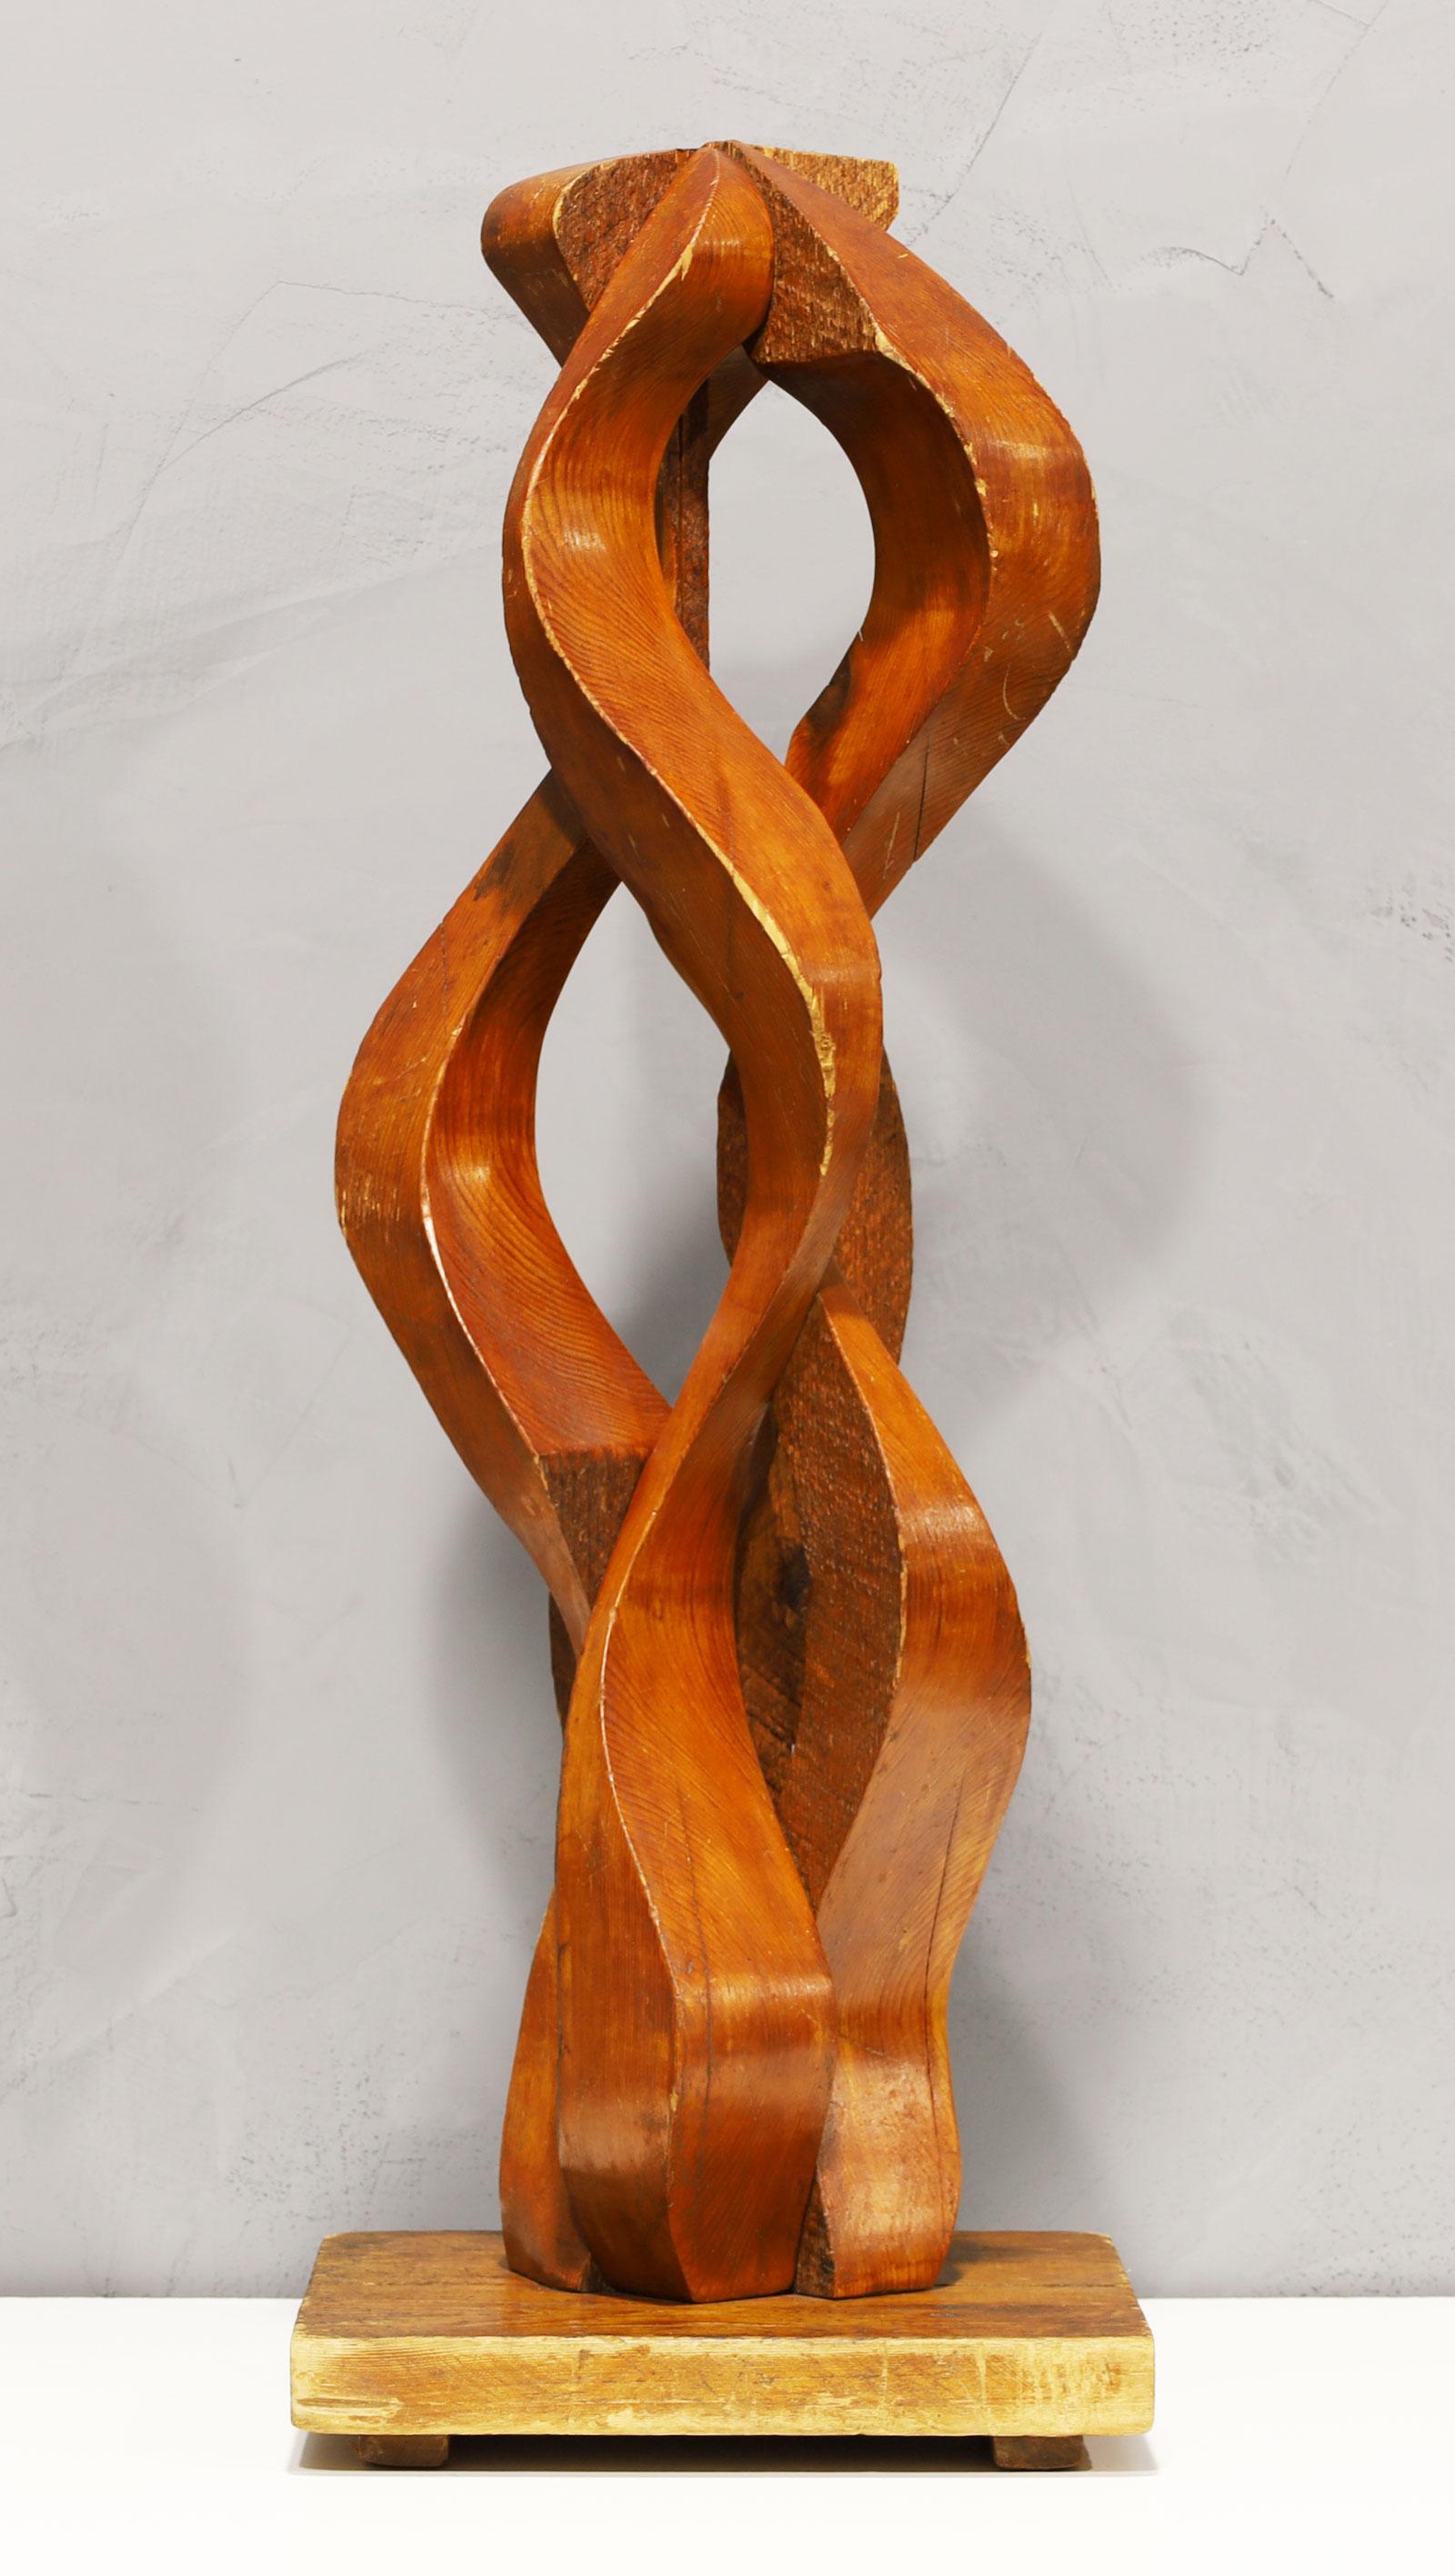 Hand crafted large wooden ribbon sculpture.